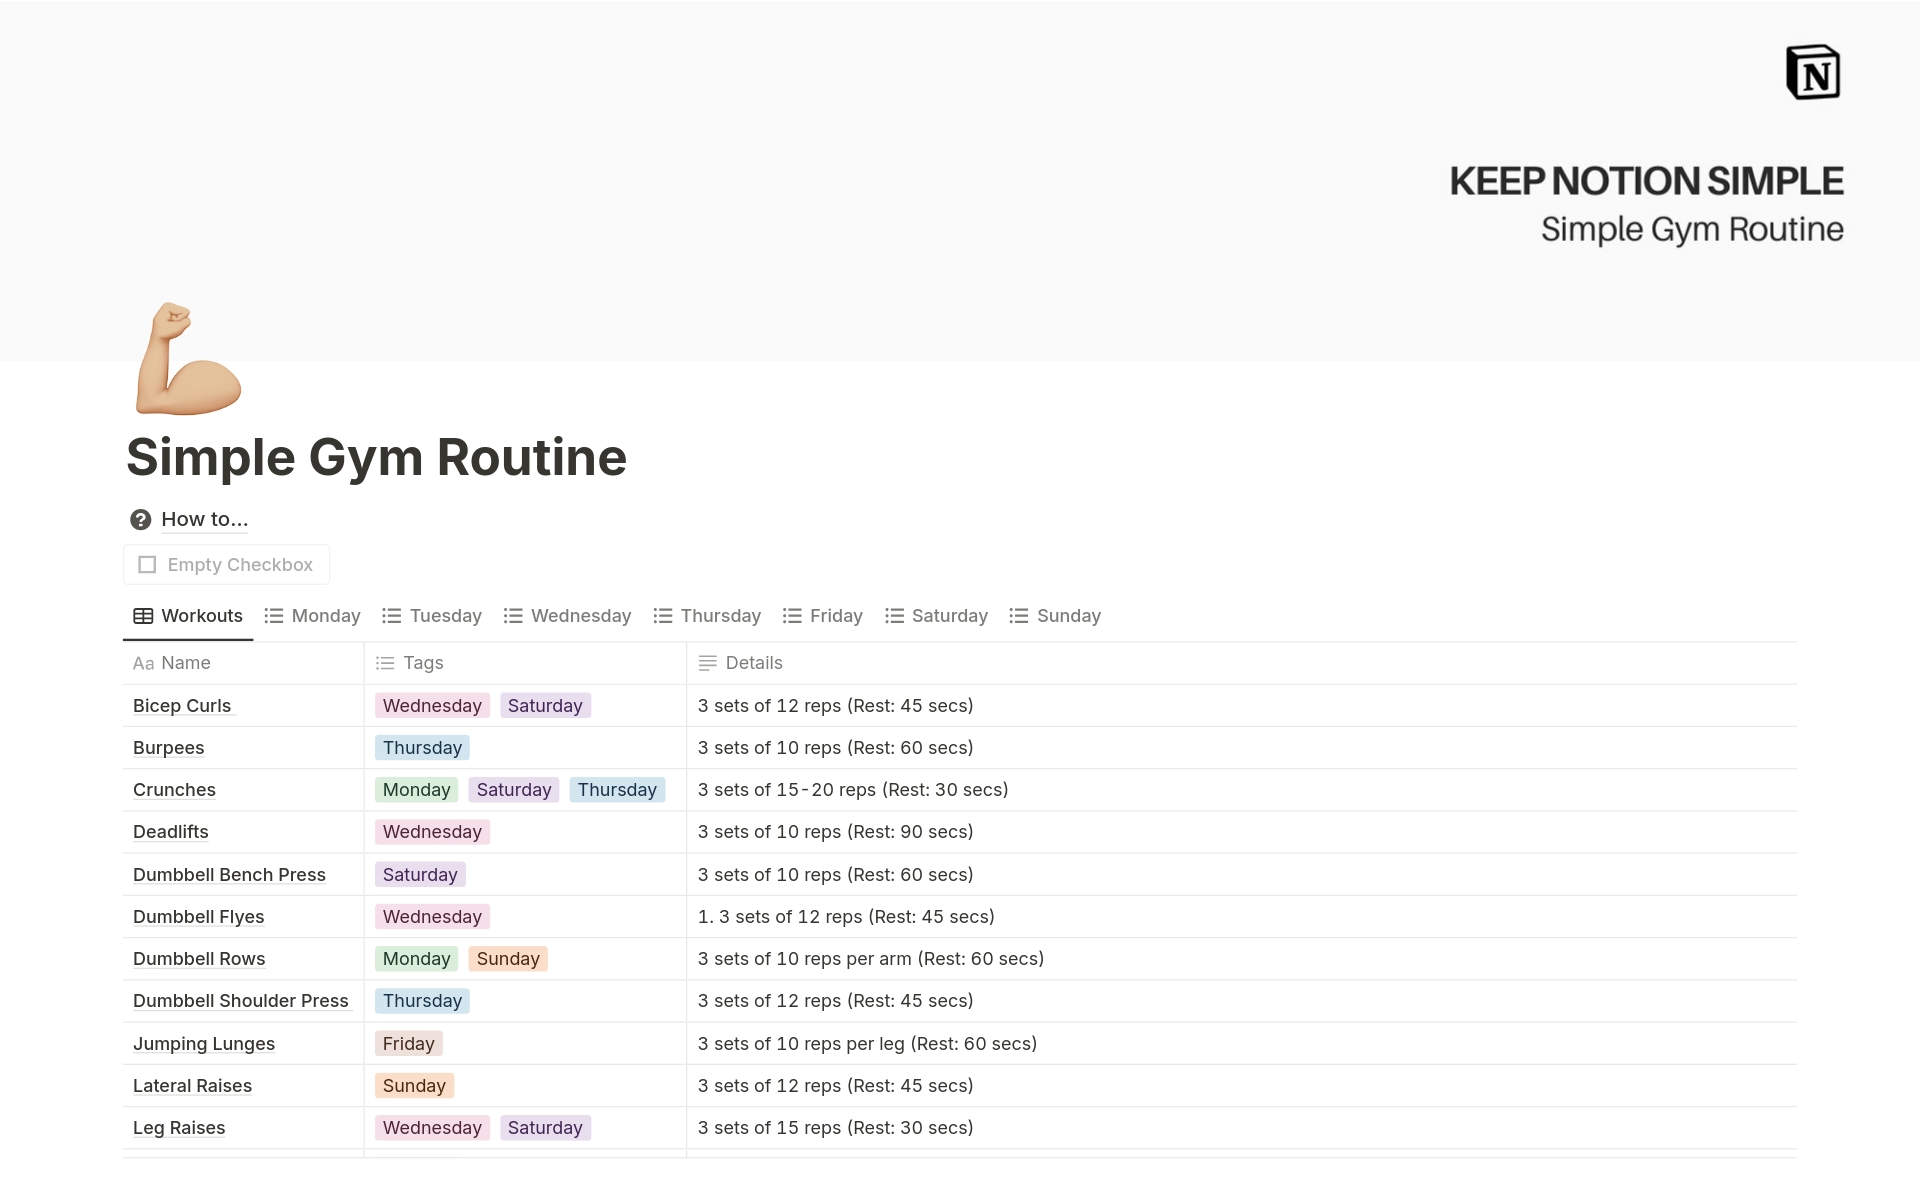 This template is designed to be a simple and visual guide to keep track of your gym routine.
It helps my wife keep the routines handy and now it can help you keep track of your workout routines.